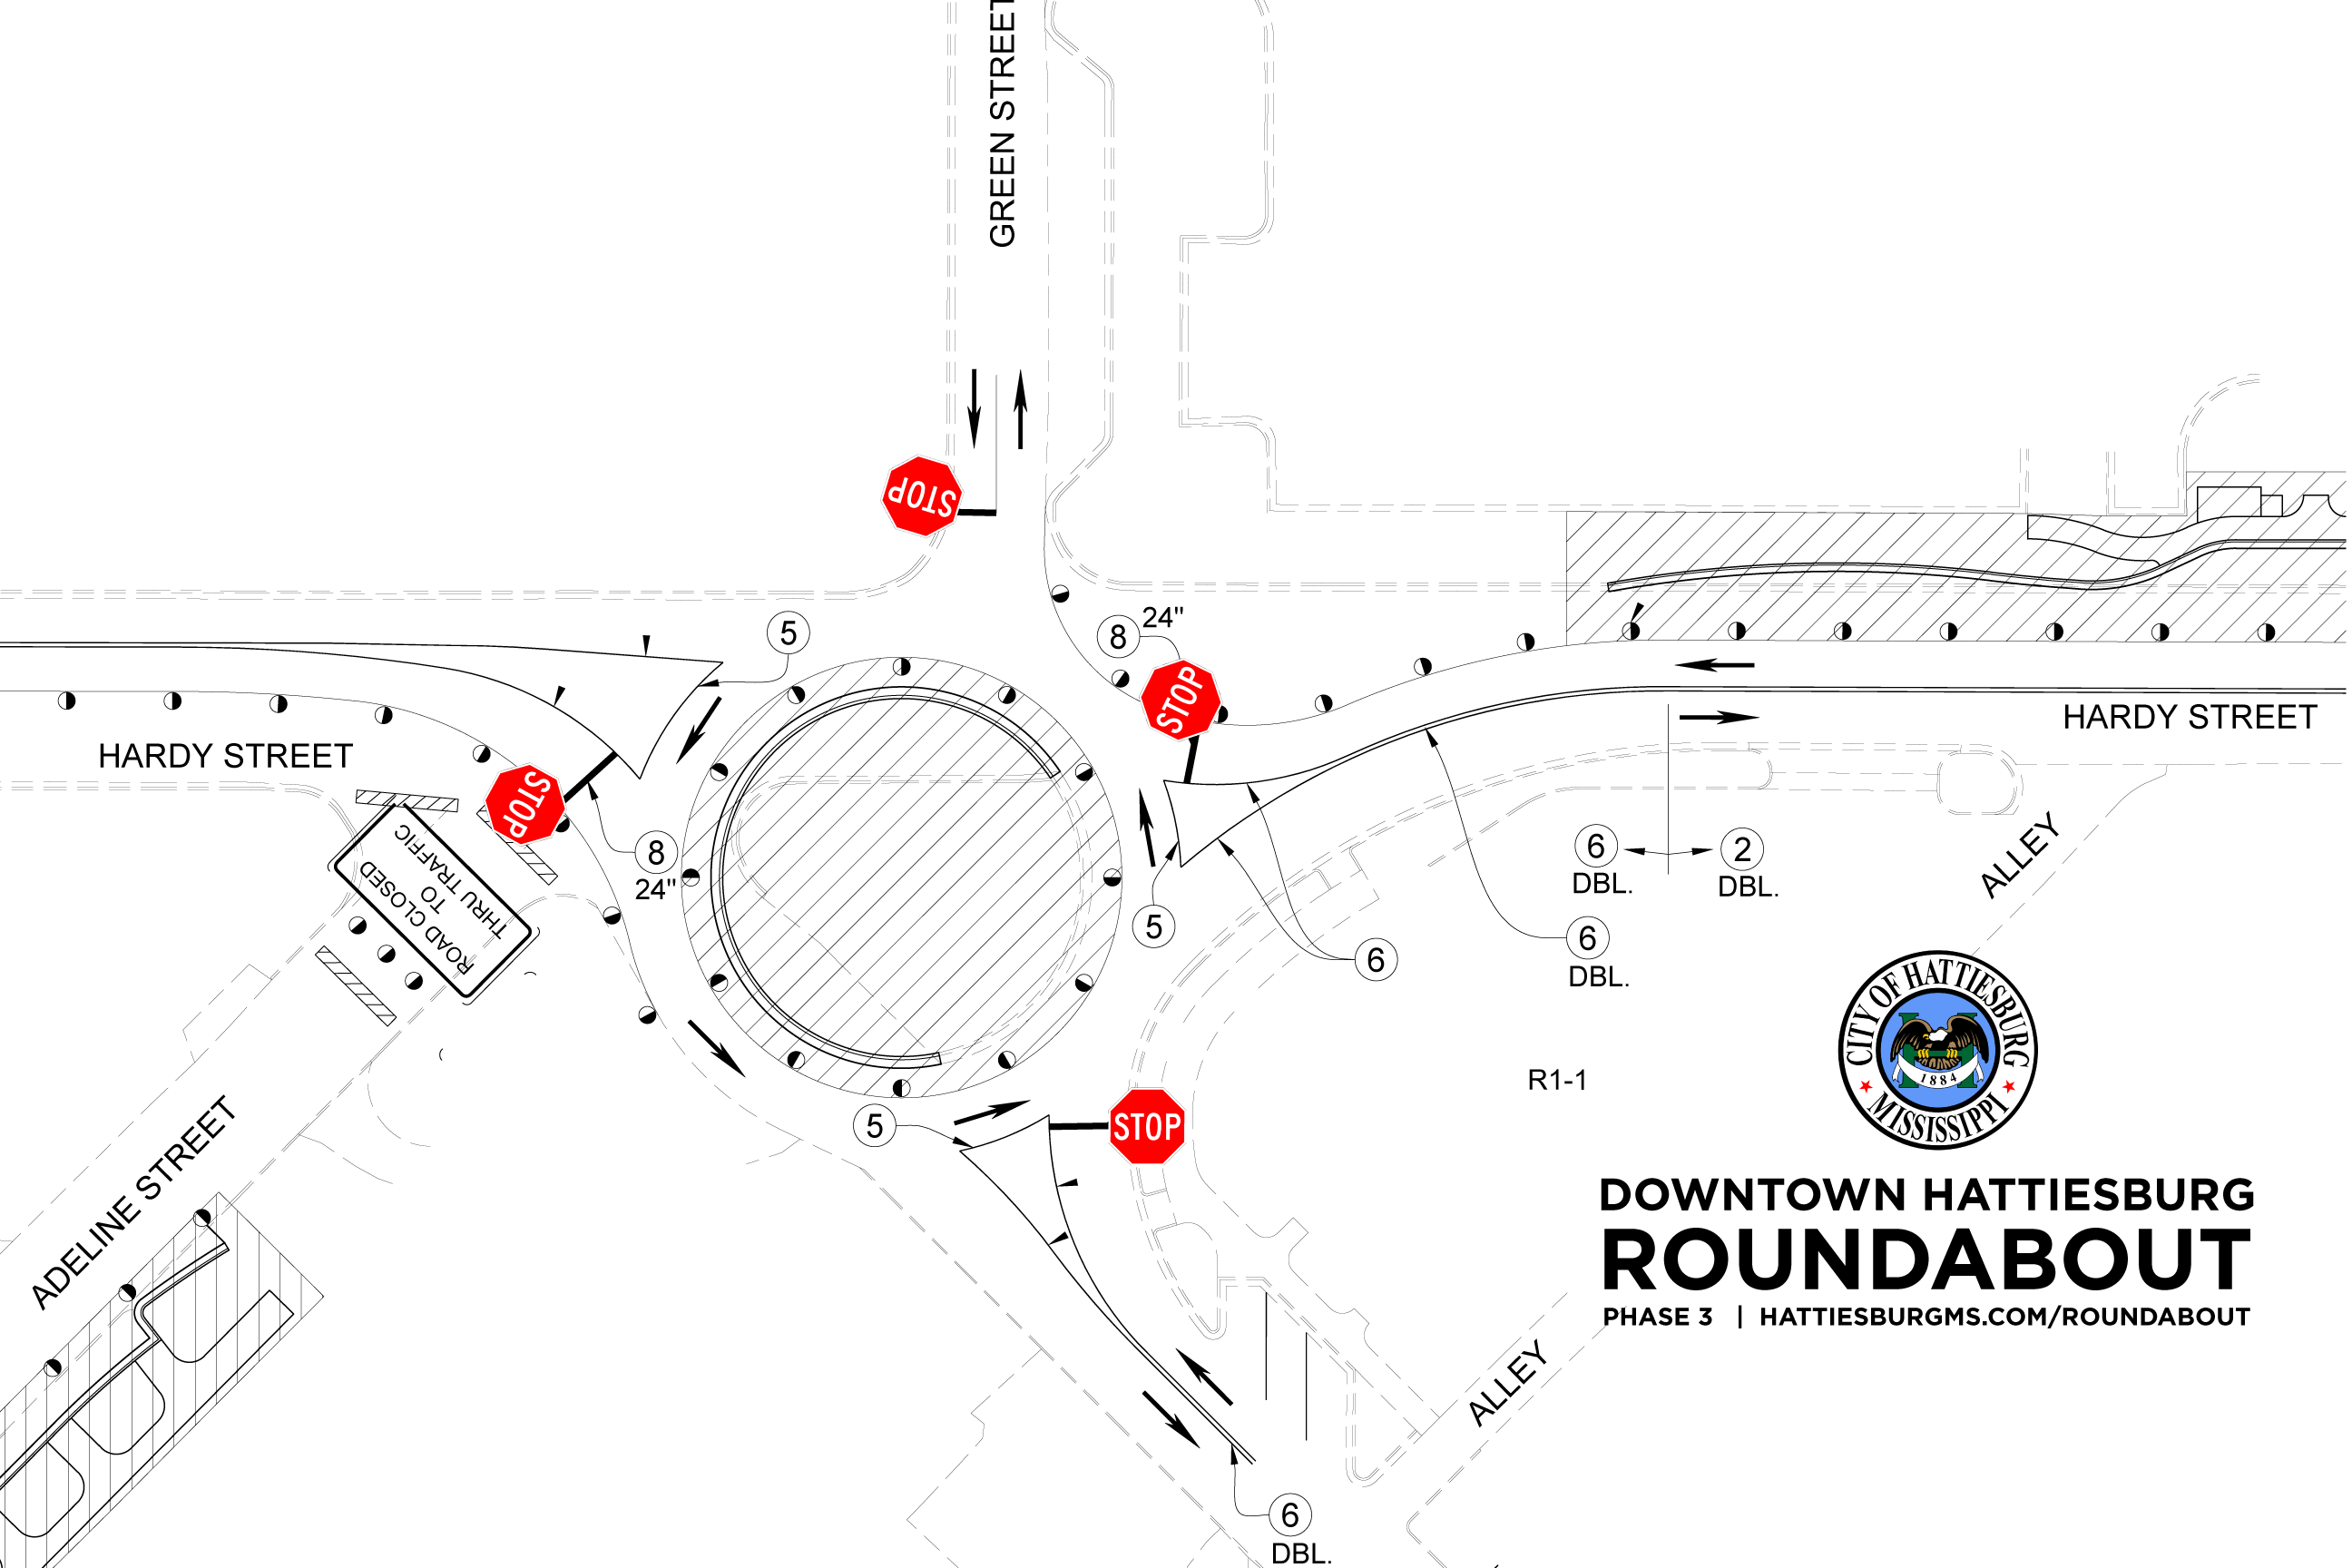 roundabout map phase3 hattiesburg